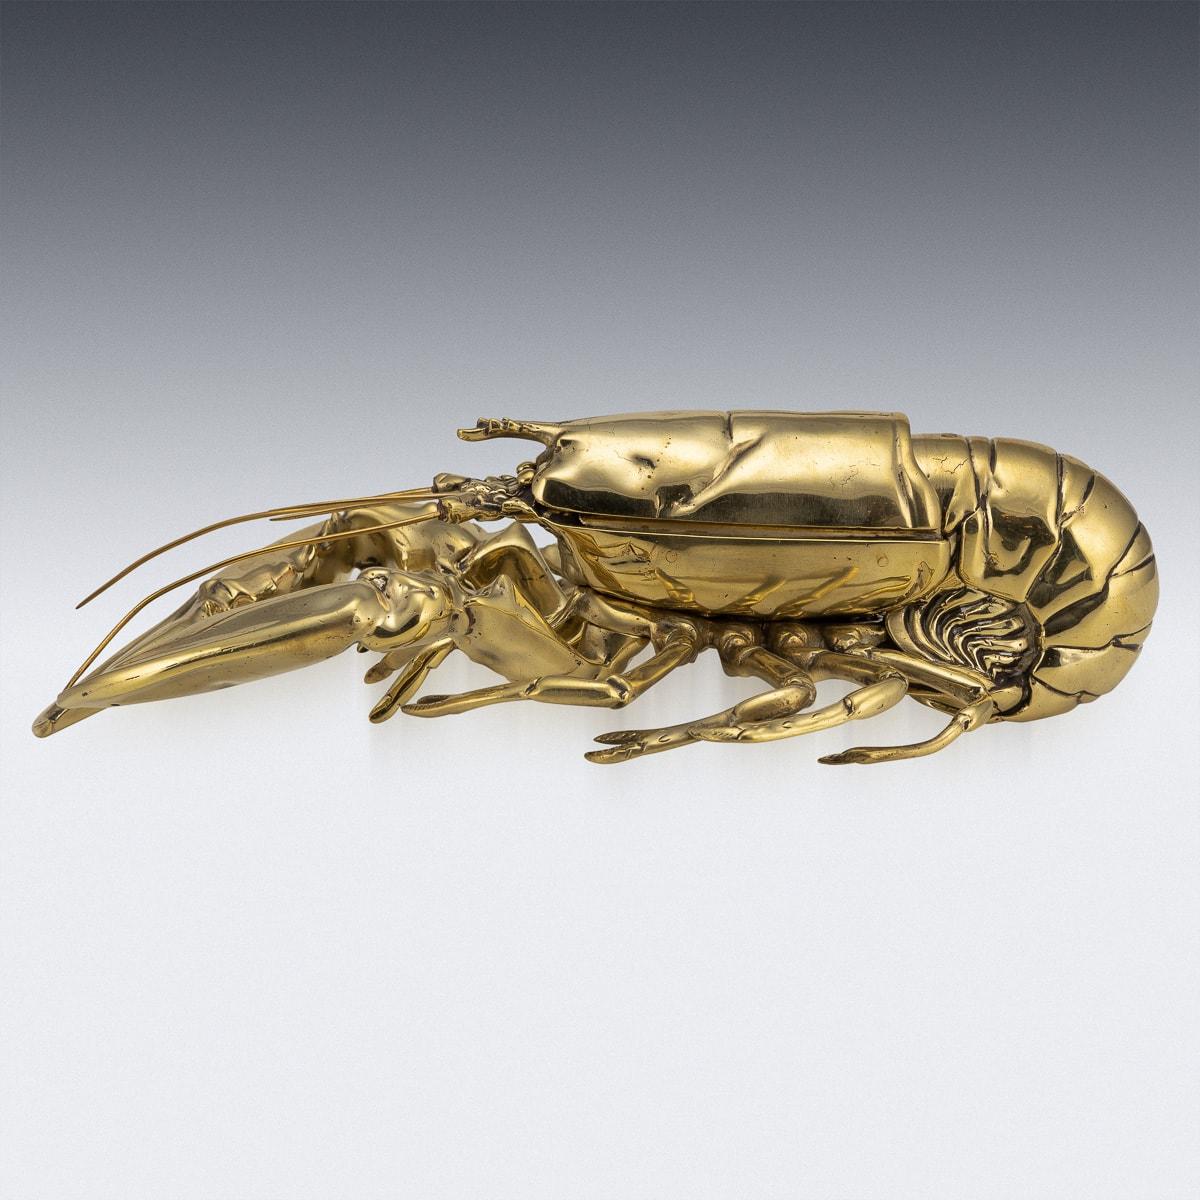 Antique late 19th Century Victorian polished brass lobster shaped inkstand, with two inkwells and lid.

CONDITION
In Great Condition - No Damage.

SIZE
Height: 9cm
Width: 32 x 16cm